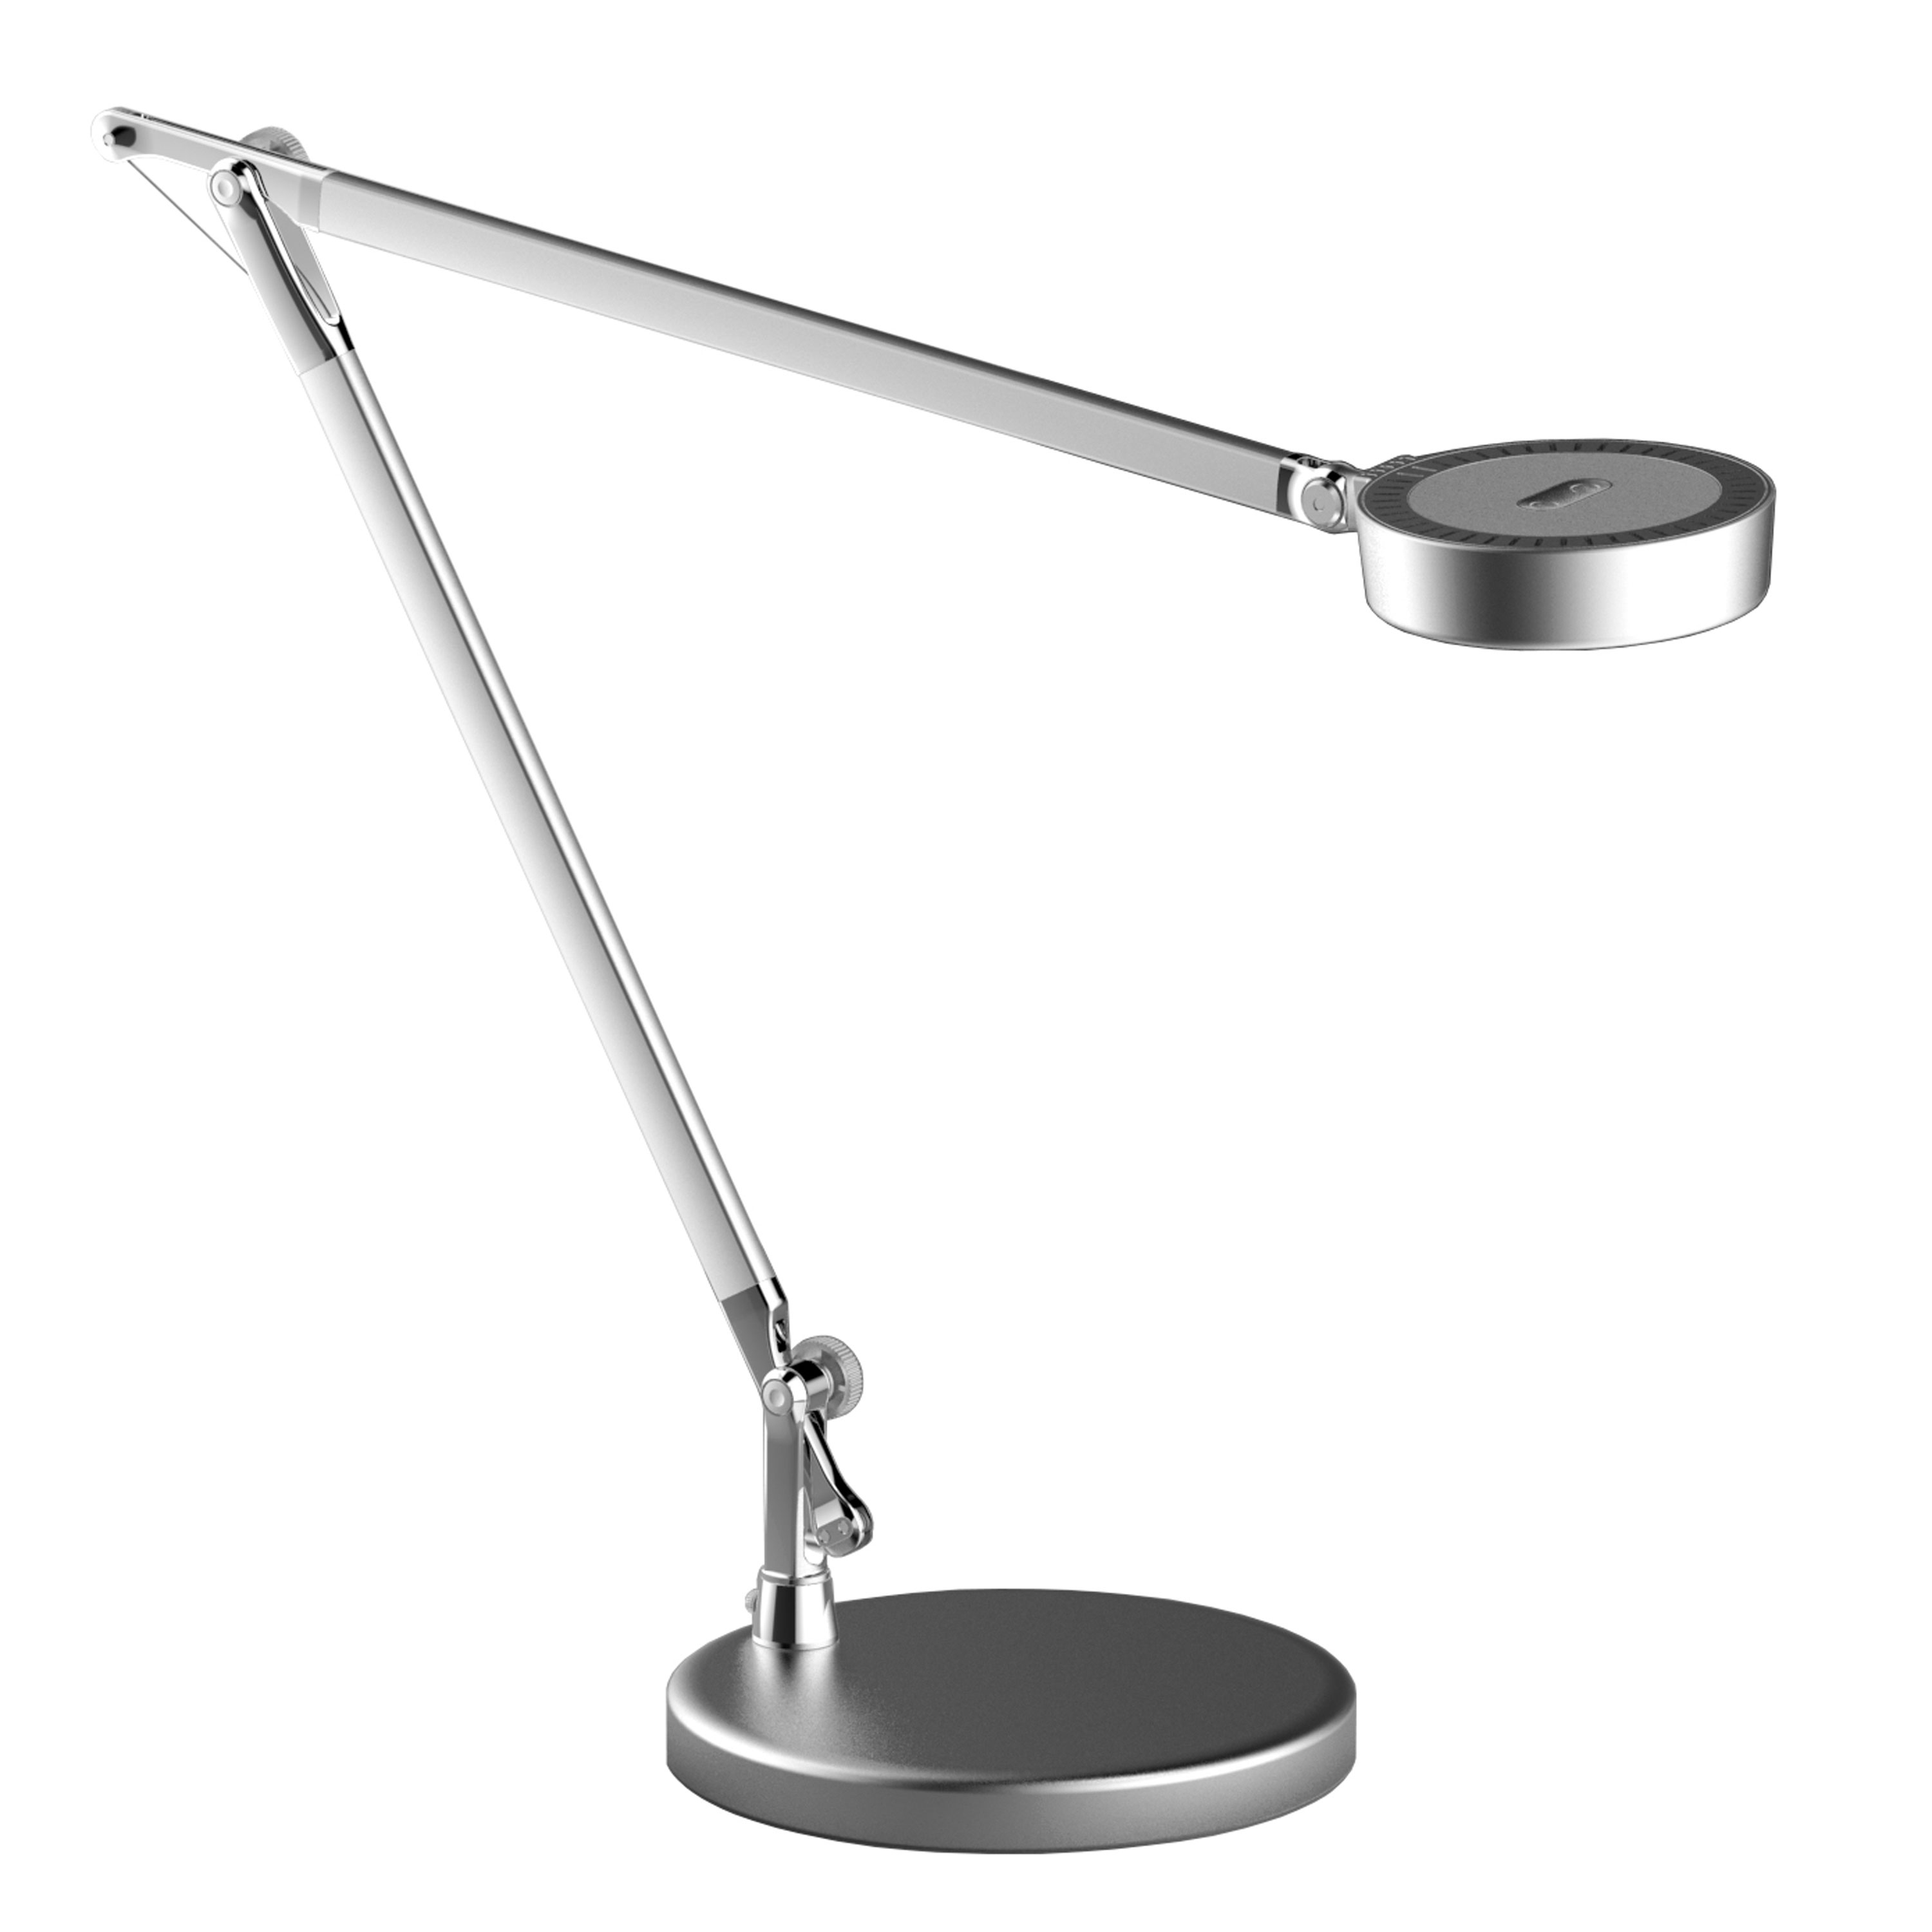 4.8W Adjustable LED Table Lamp, Silver Finish 